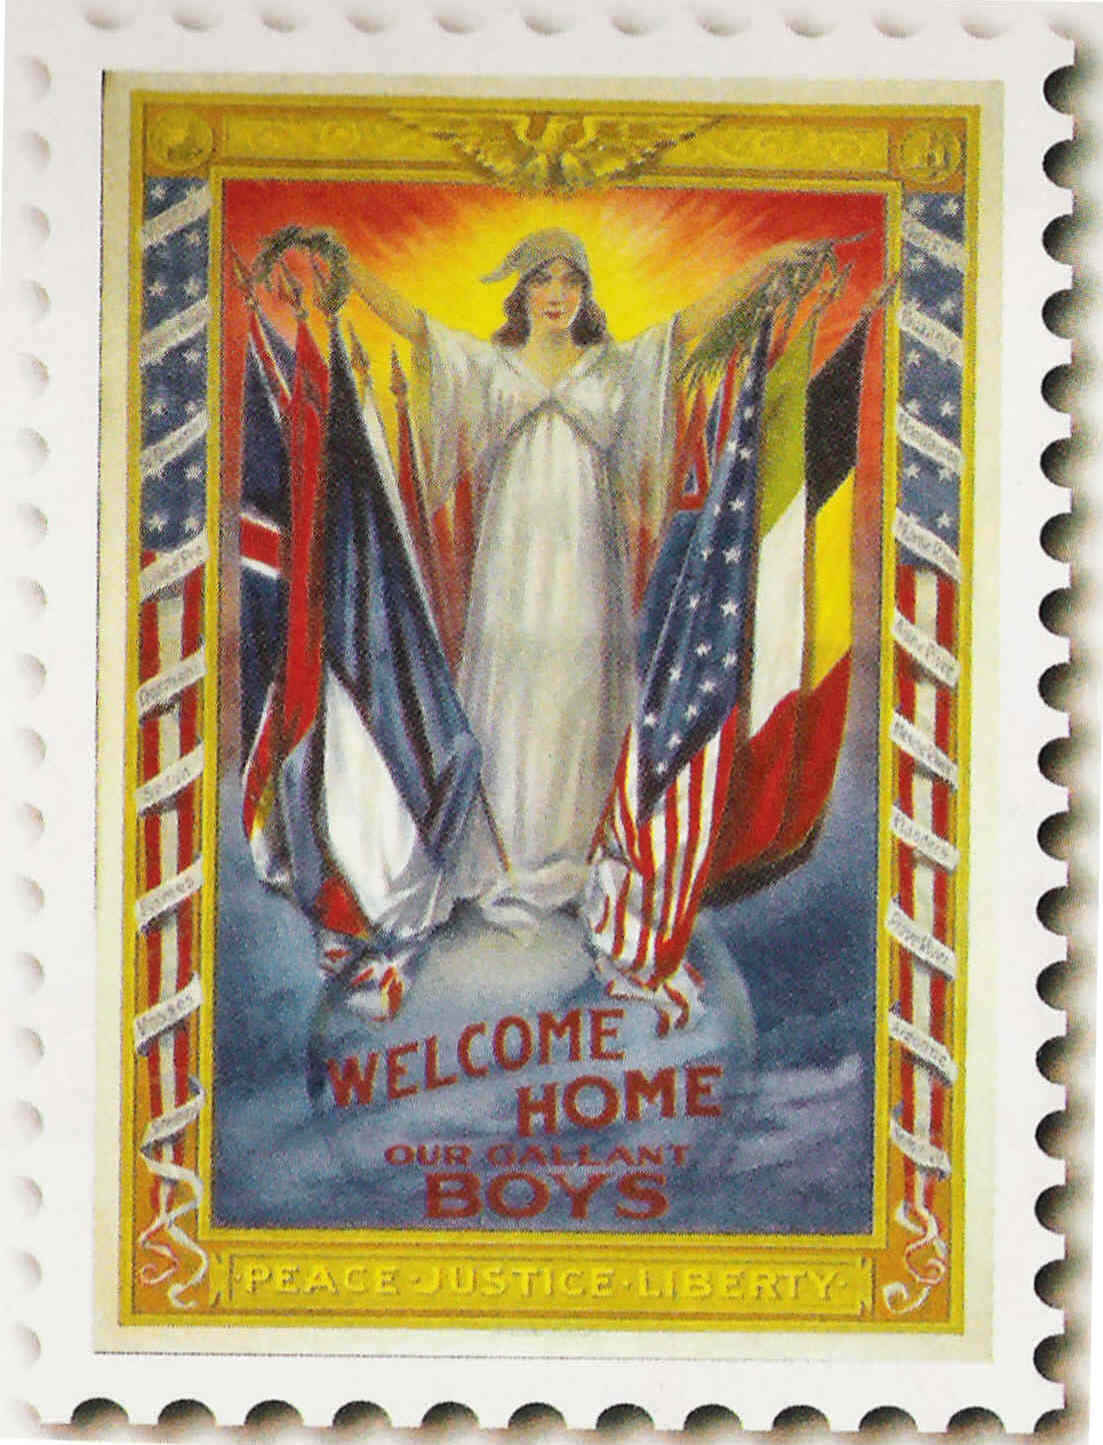 10g - giant alien goddess Columbia "Welcome home our gallant boys", Peace, Justice, Liberty